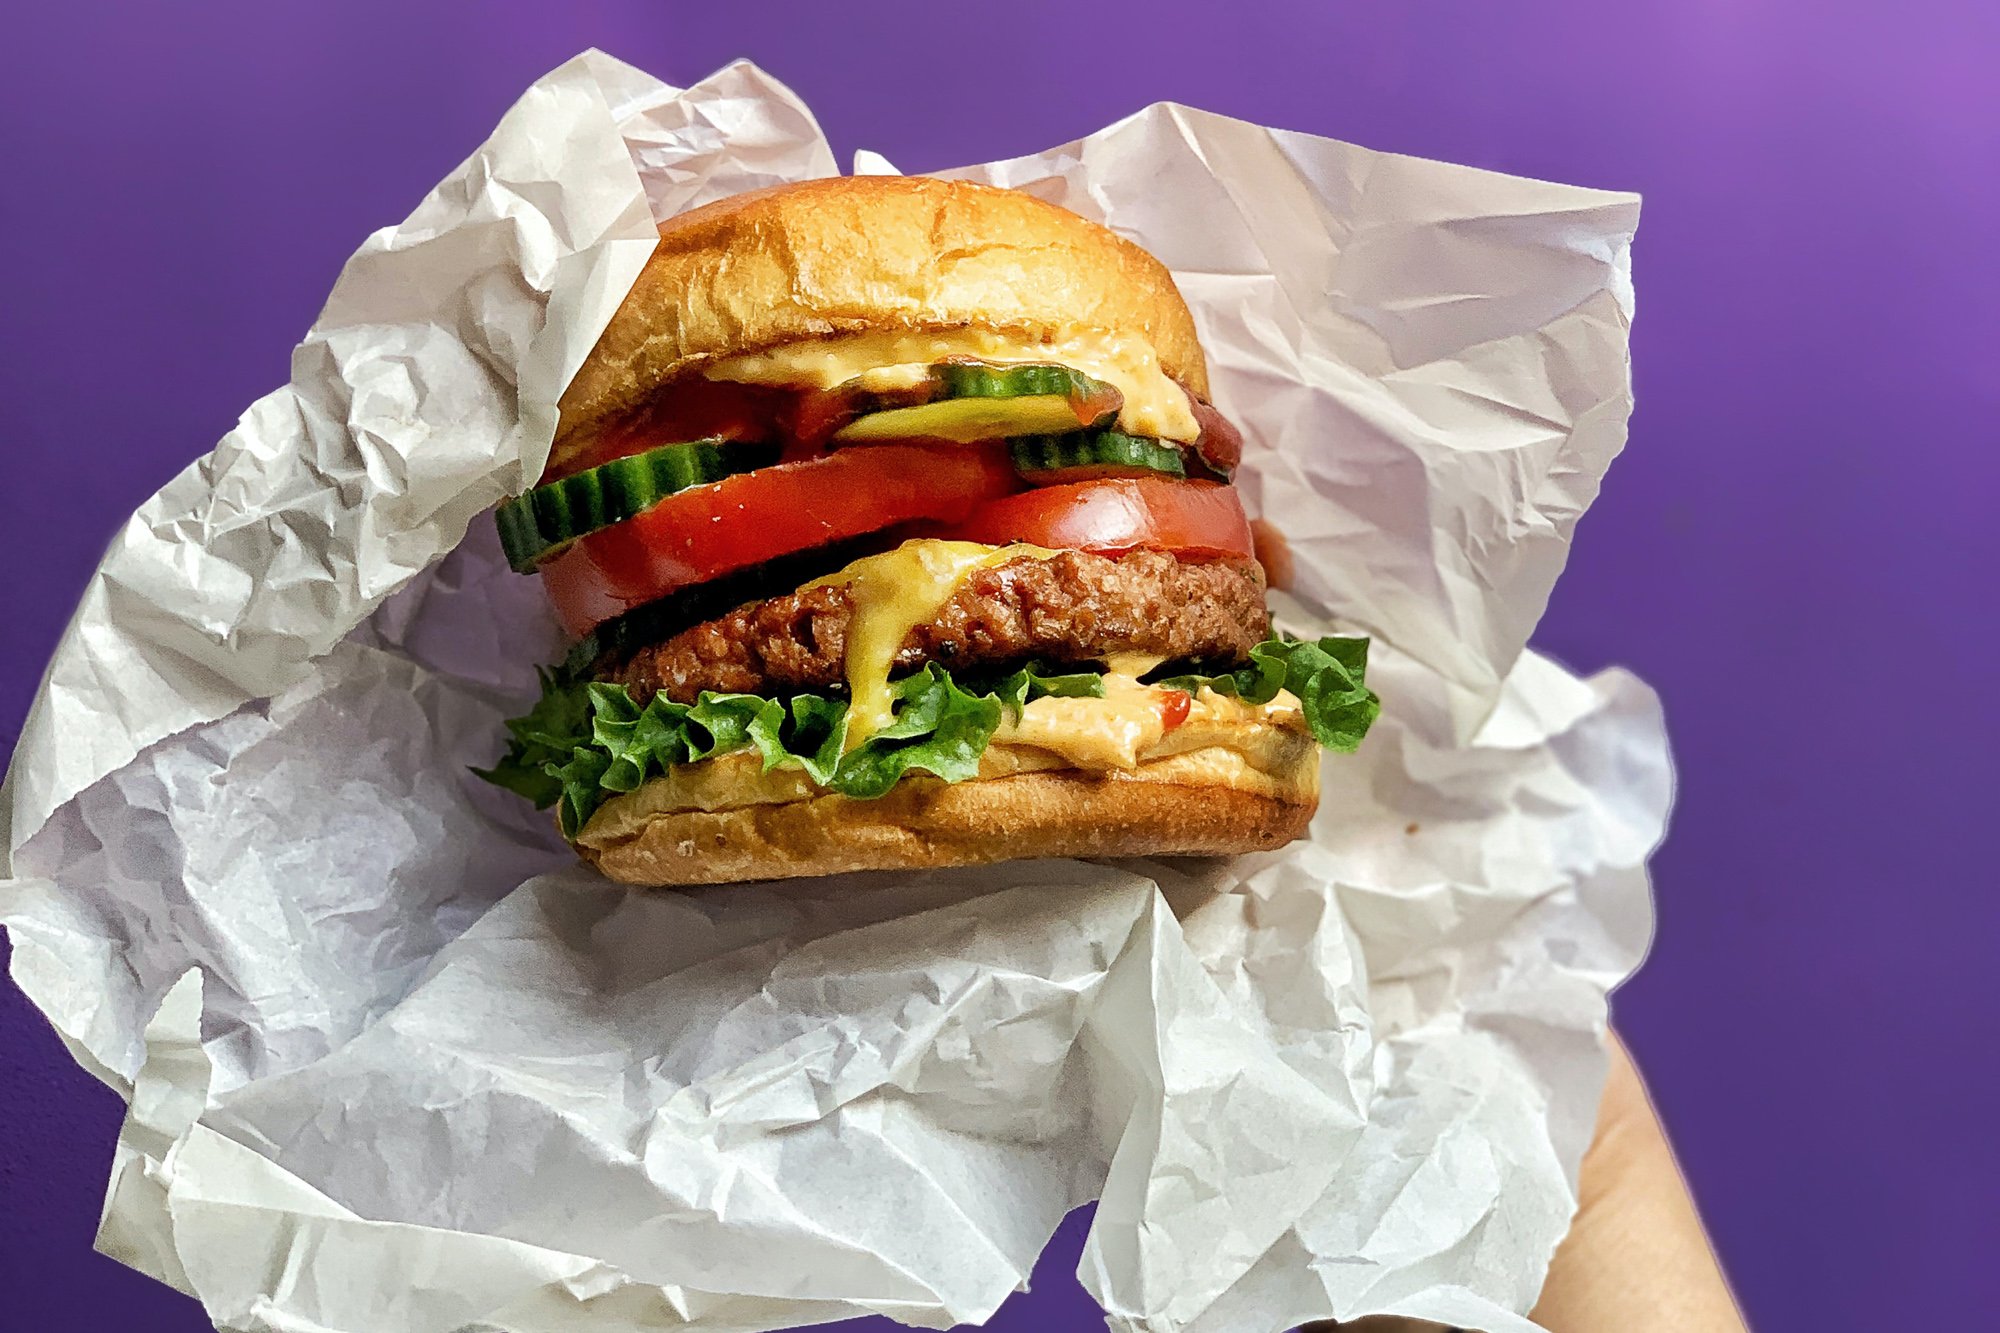 Likemeat burger in white paper being held in front of a purple background